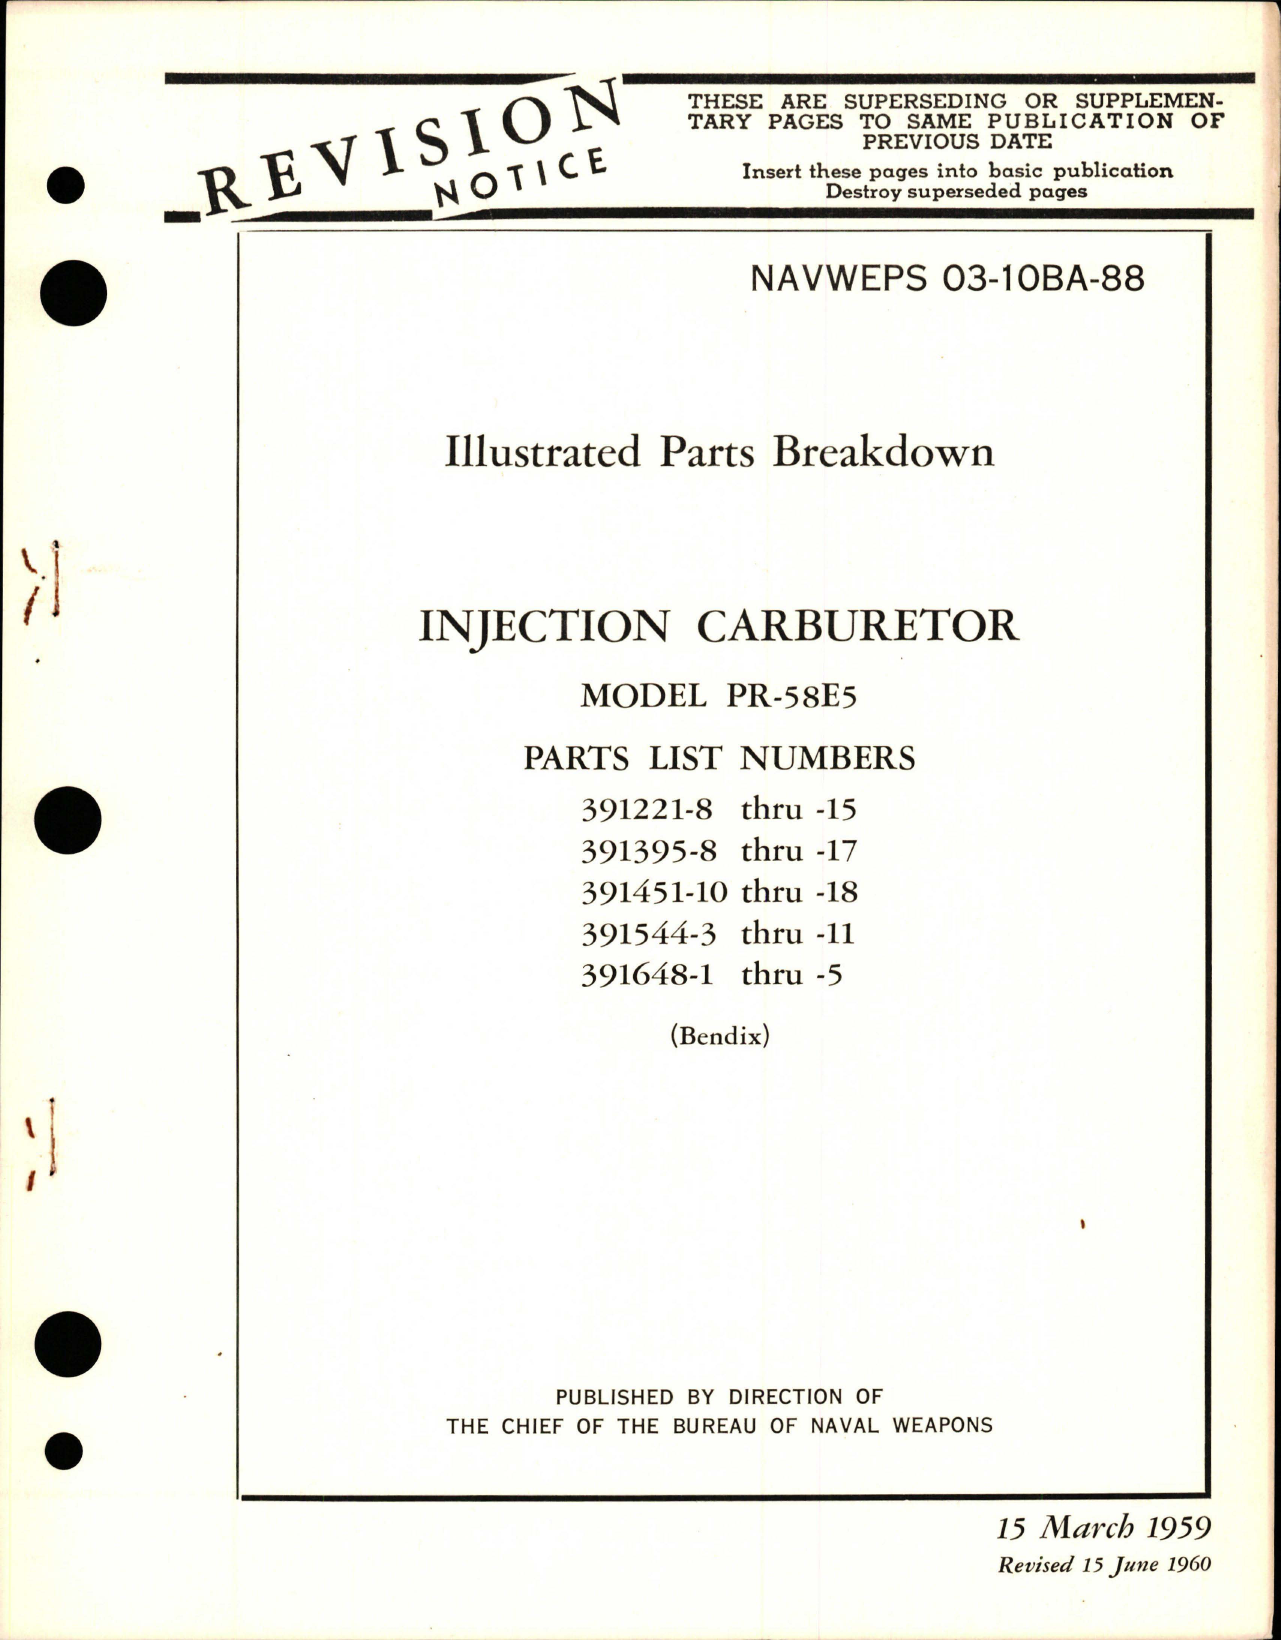 Sample page 1 from AirCorps Library document: Illustrated Parts Breakdown for Injection Carburetor - Model PR-58E5